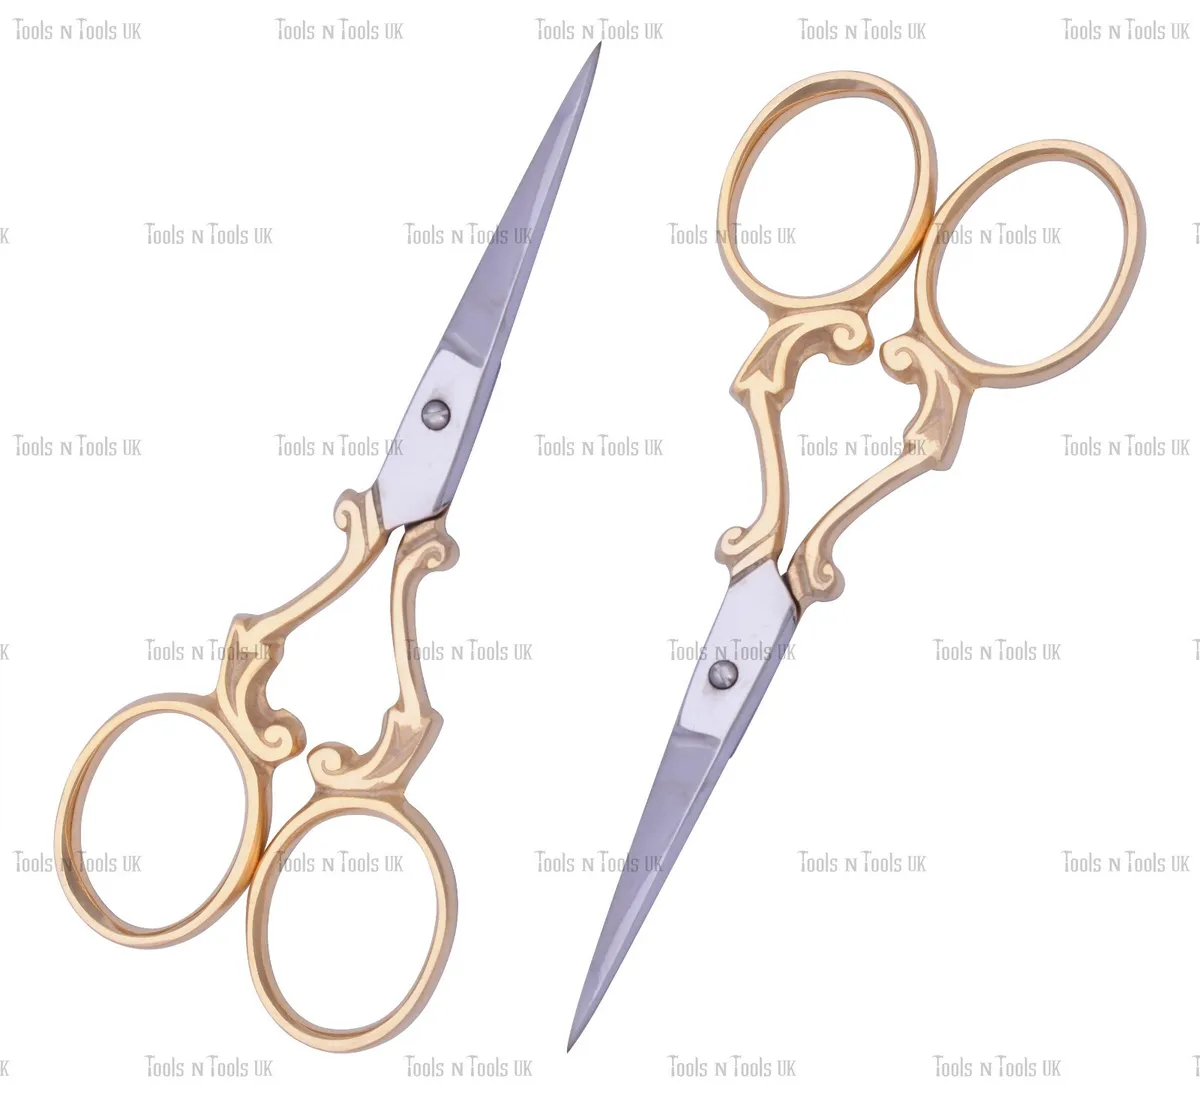 4 Multi Purpose Eye brow Fancy Small Embroidery Sewing Scissors Gold Plated